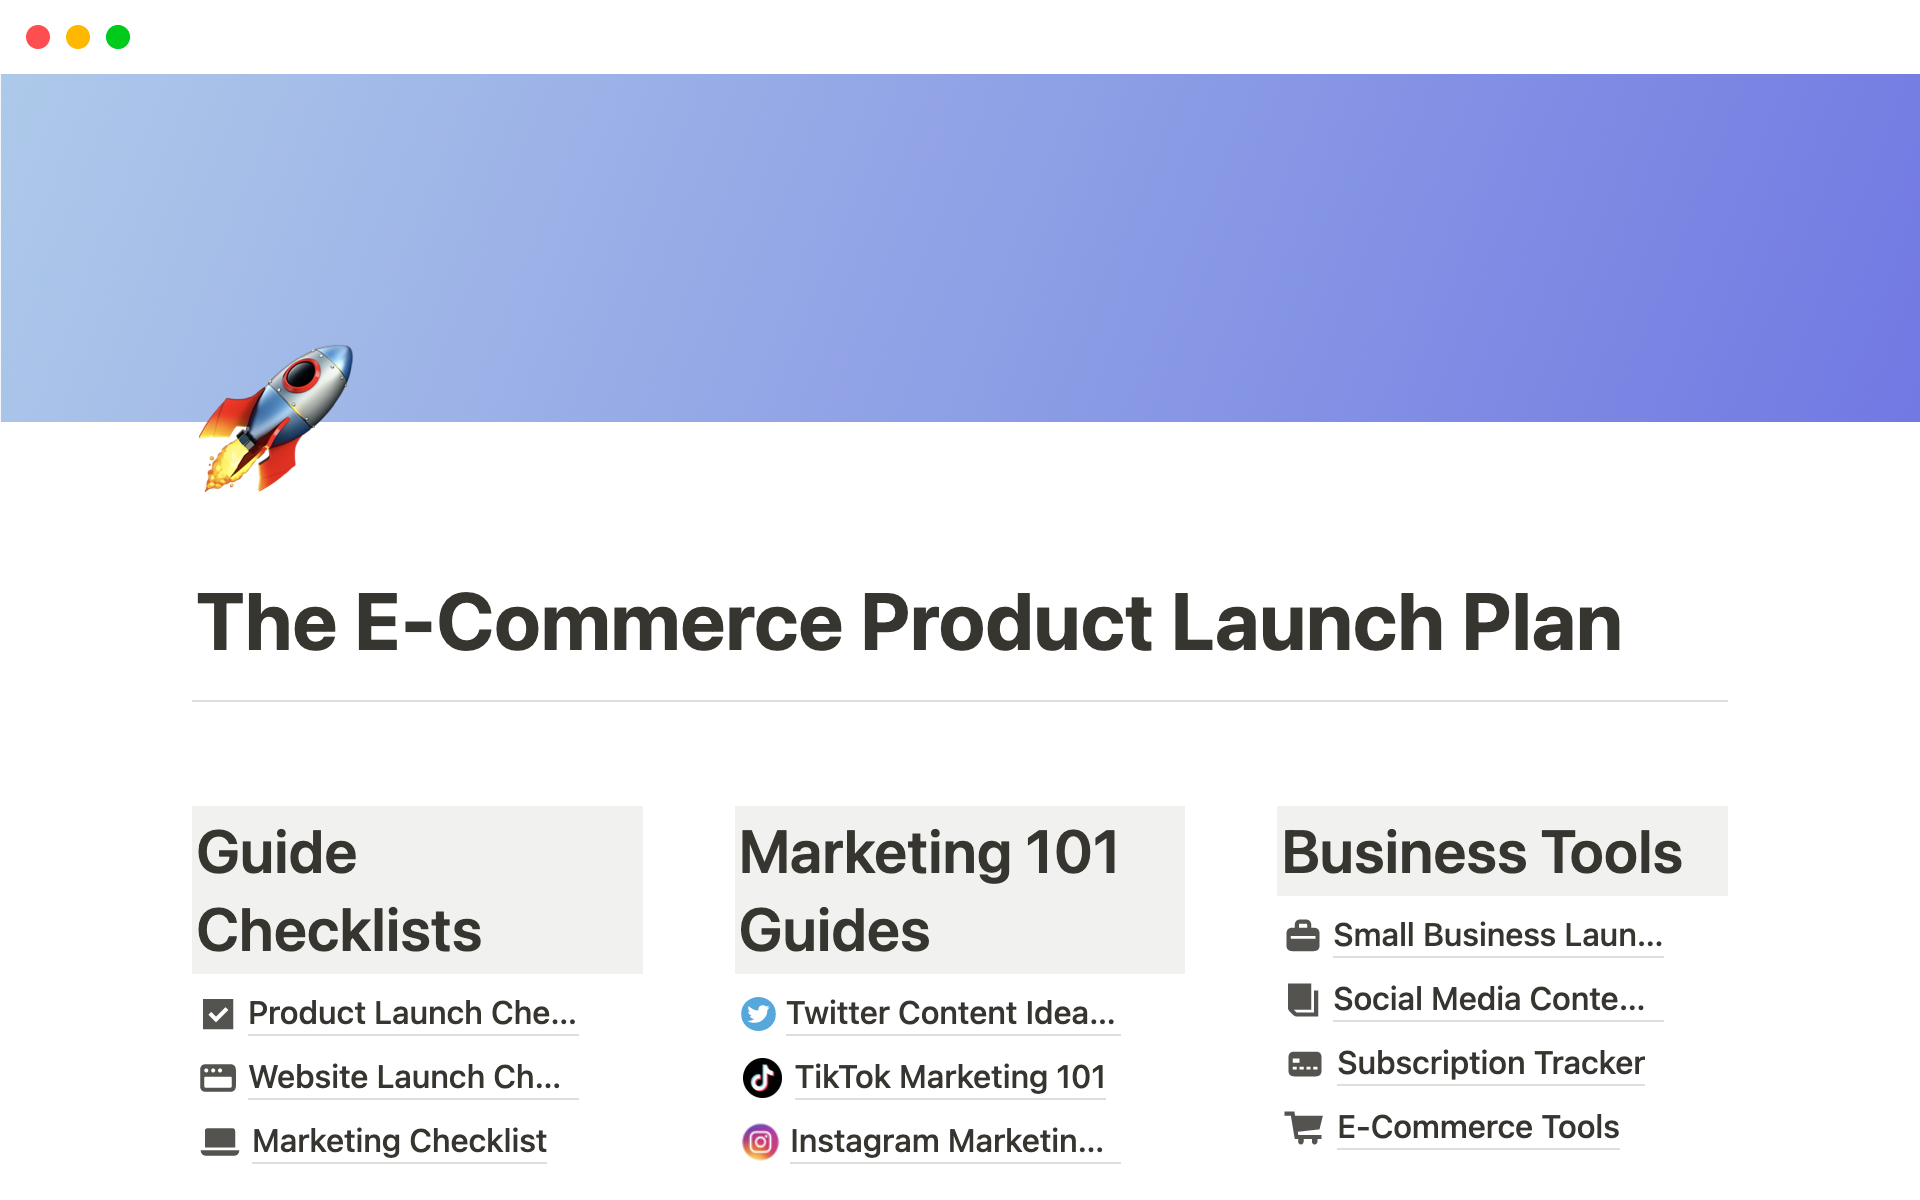 A step-by-step guide to launching your e-commerce business.